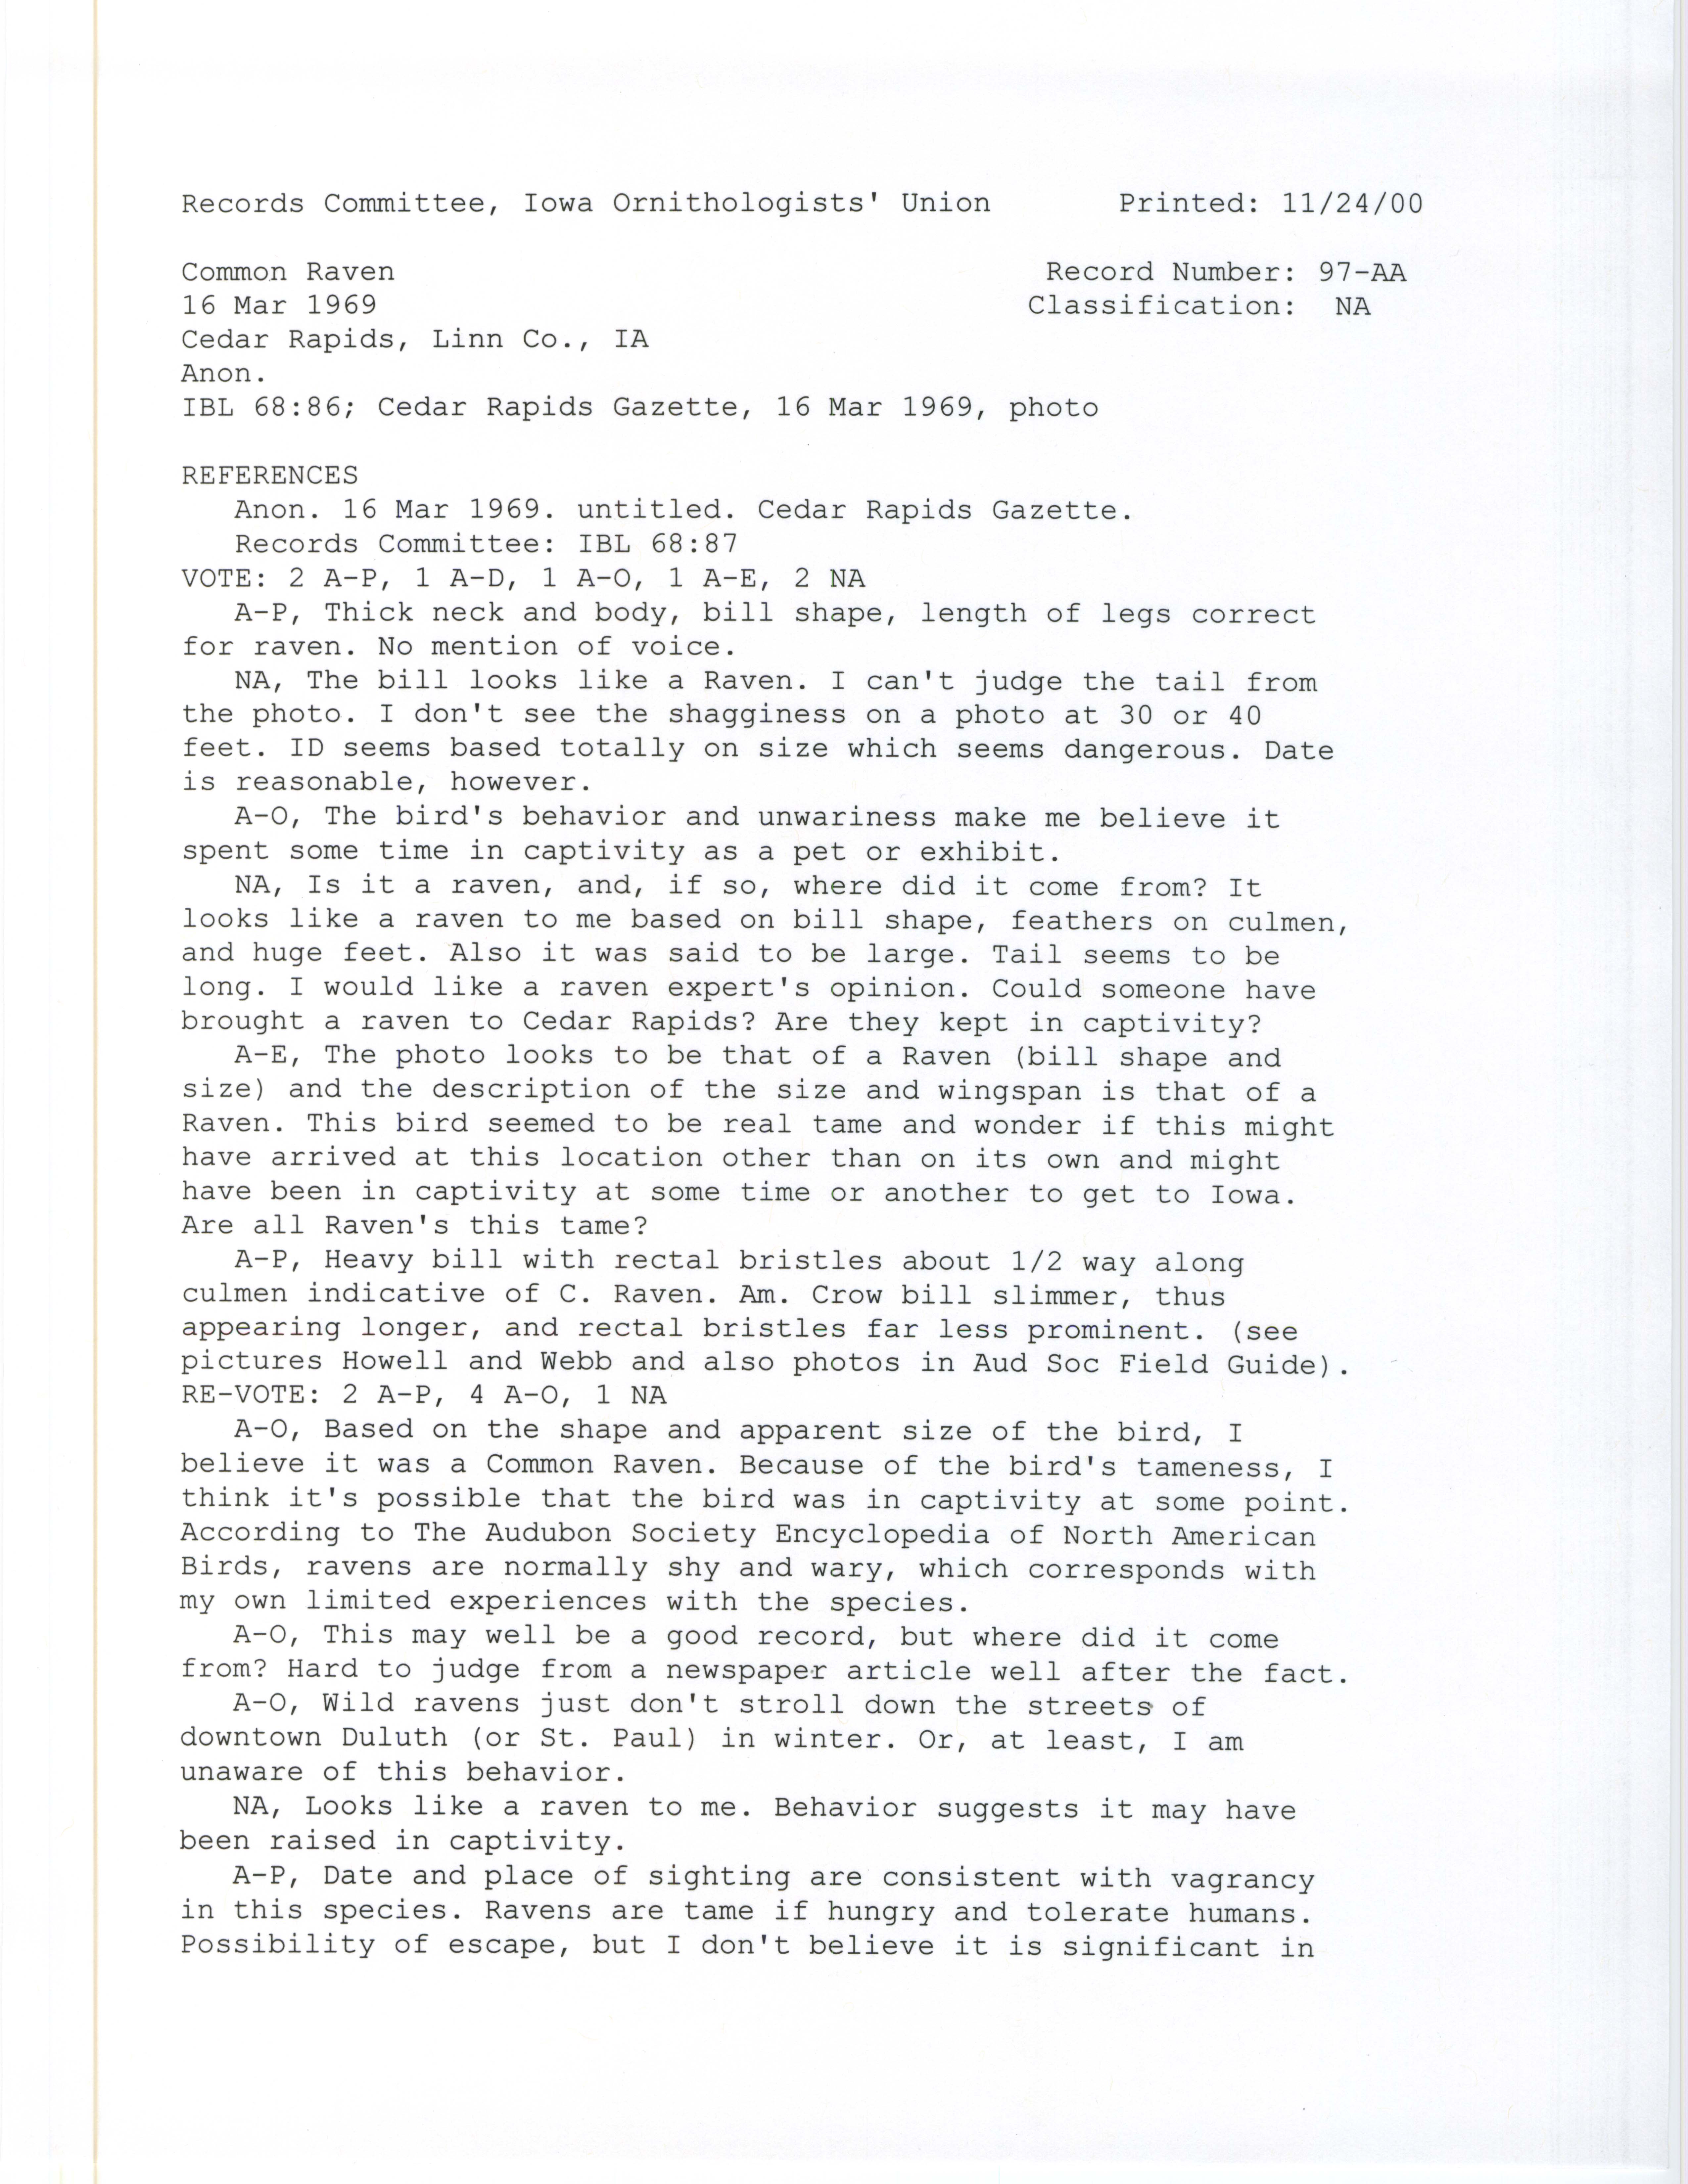 Records Committee review for rare bird sighting for Common Raven at Cedar Rapids in 1969